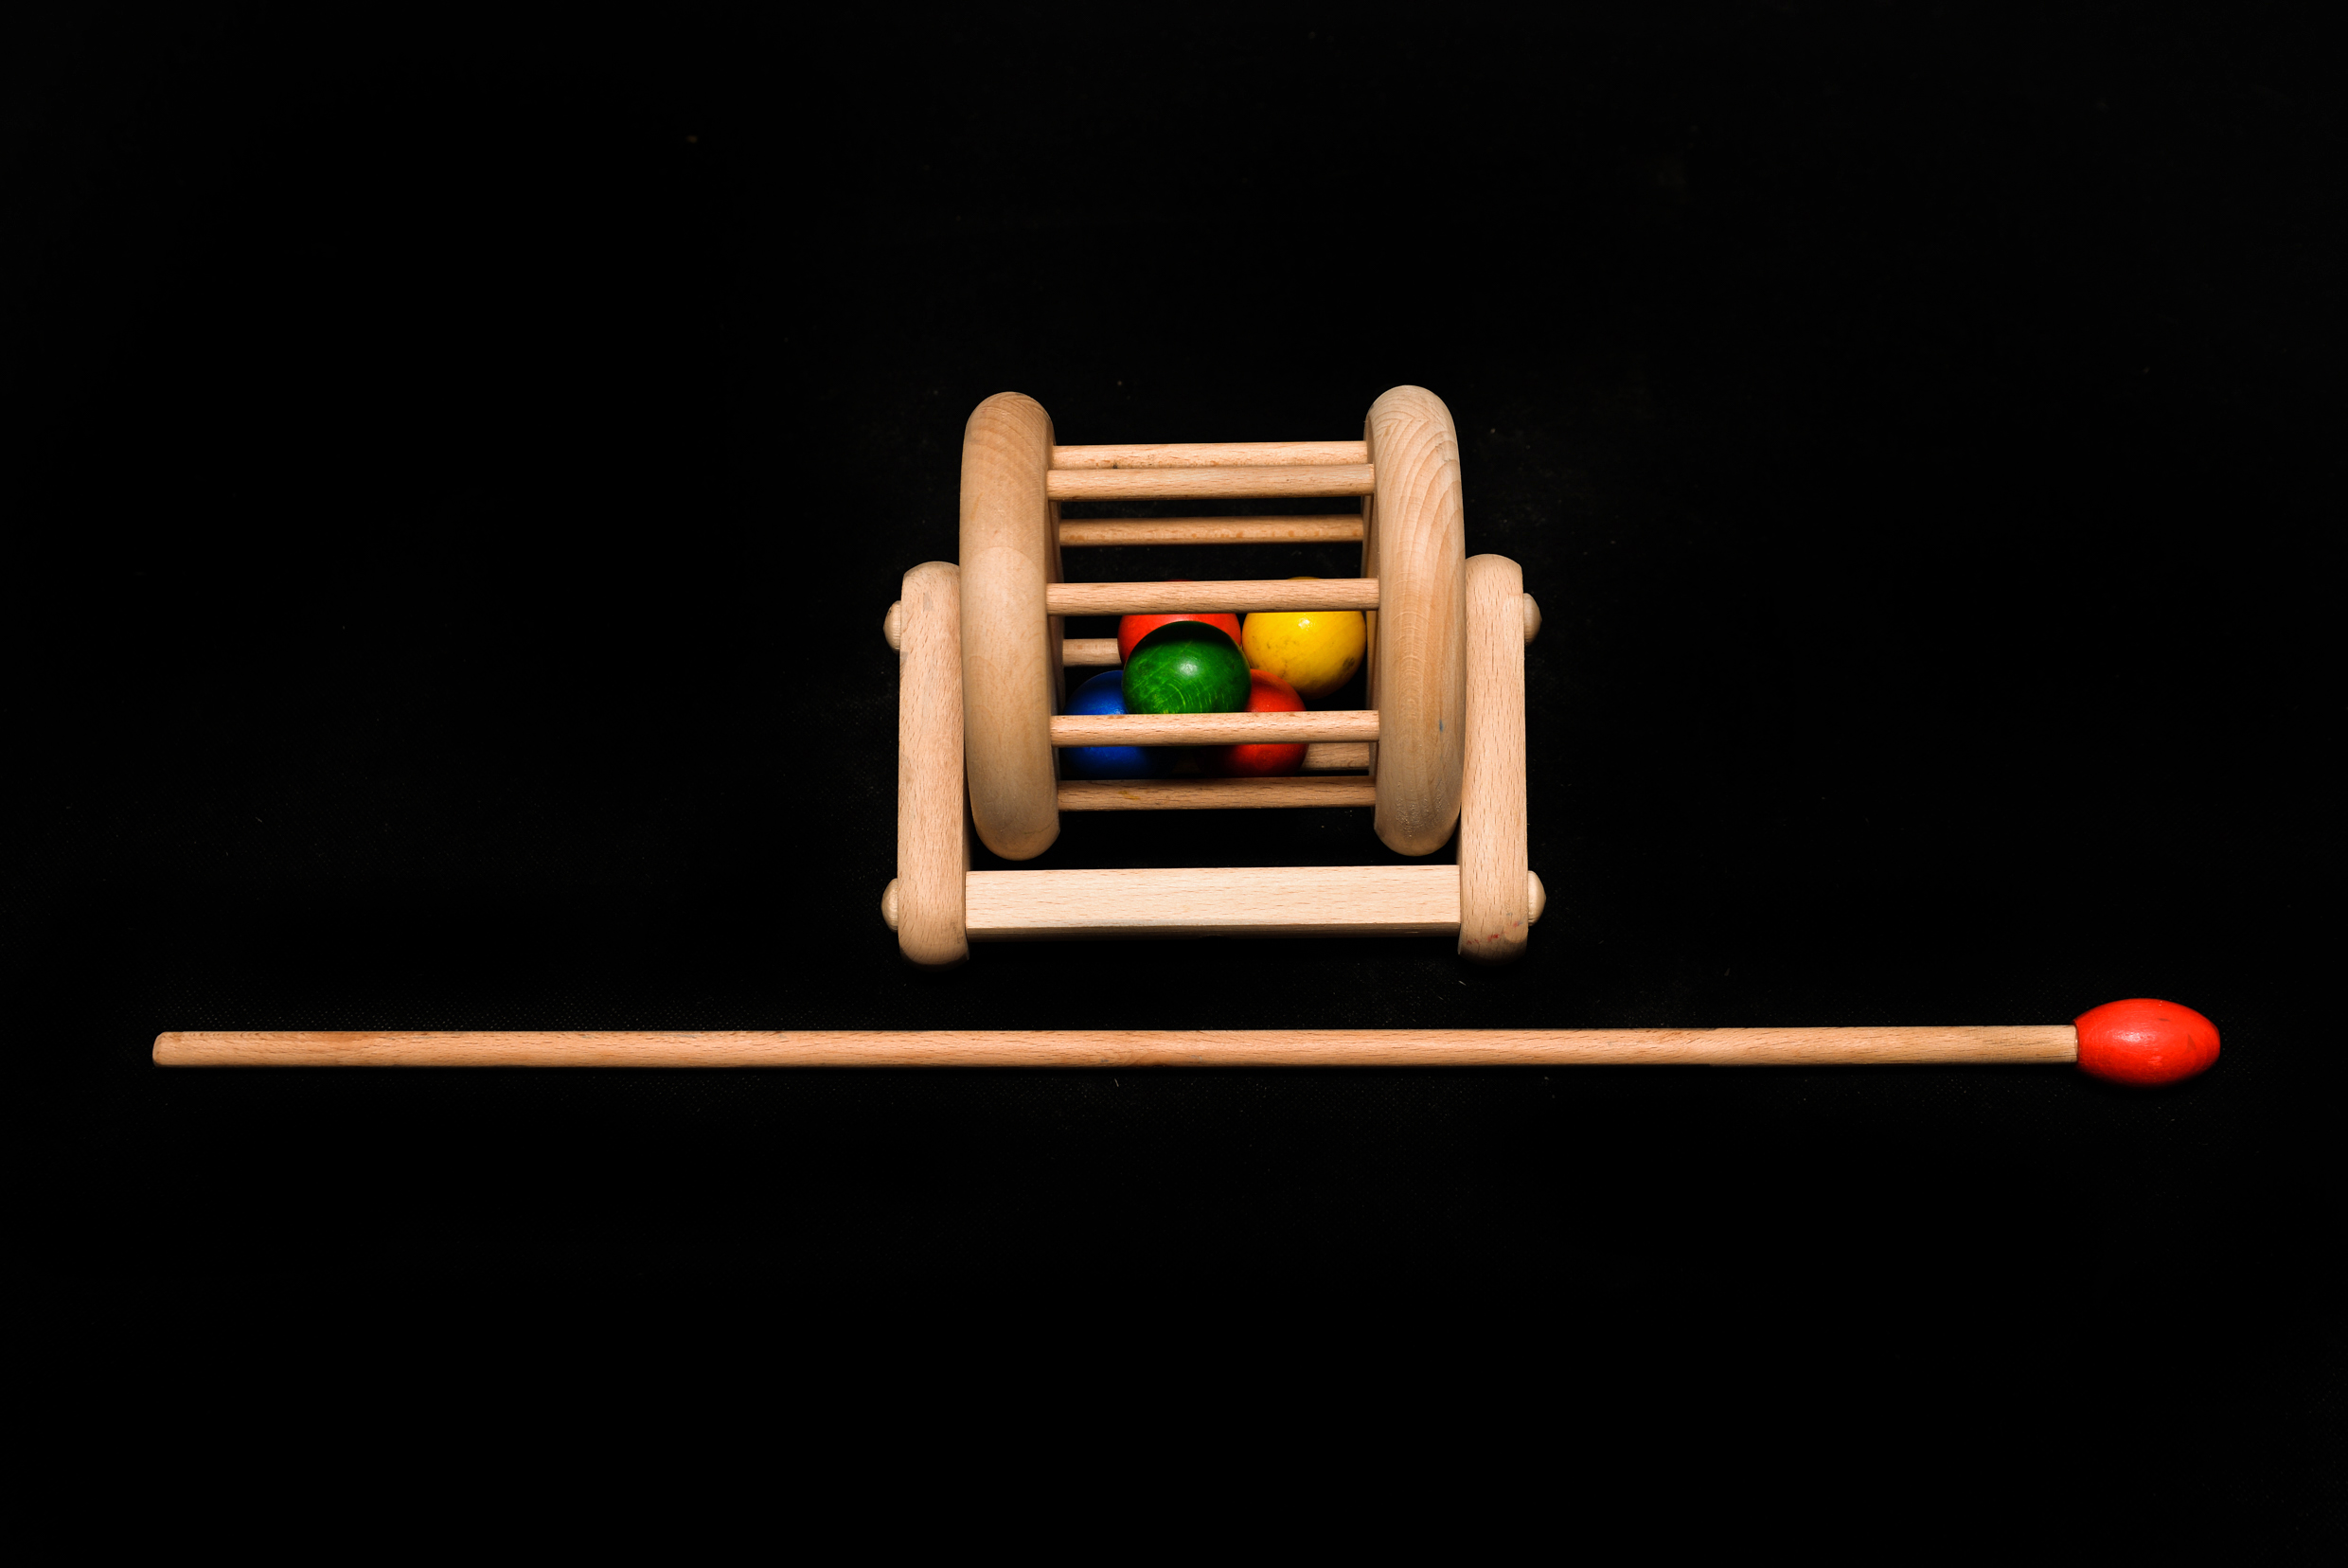 Toy on a stick "DRUM" - image